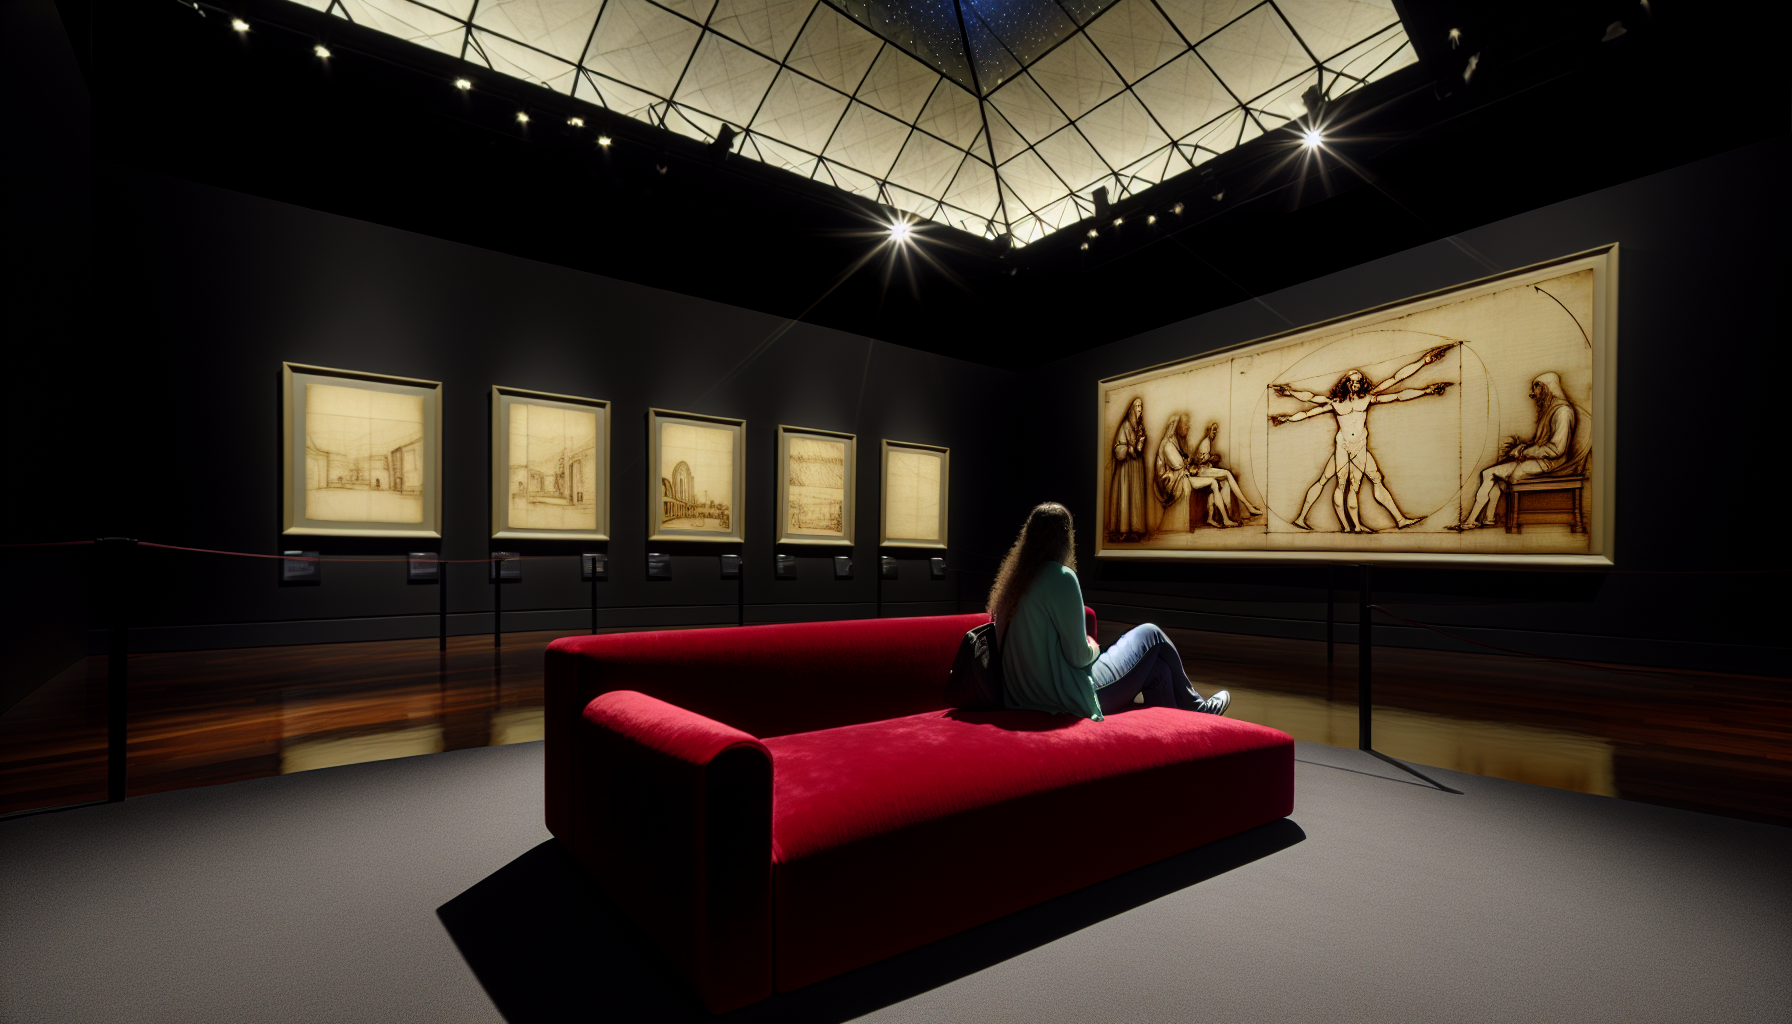 a museums exhibition with scetches from leonardo da vinci in a big hall and one female vistor sitting in front on a red sofa. the room ceiling is dark with some spot lights.